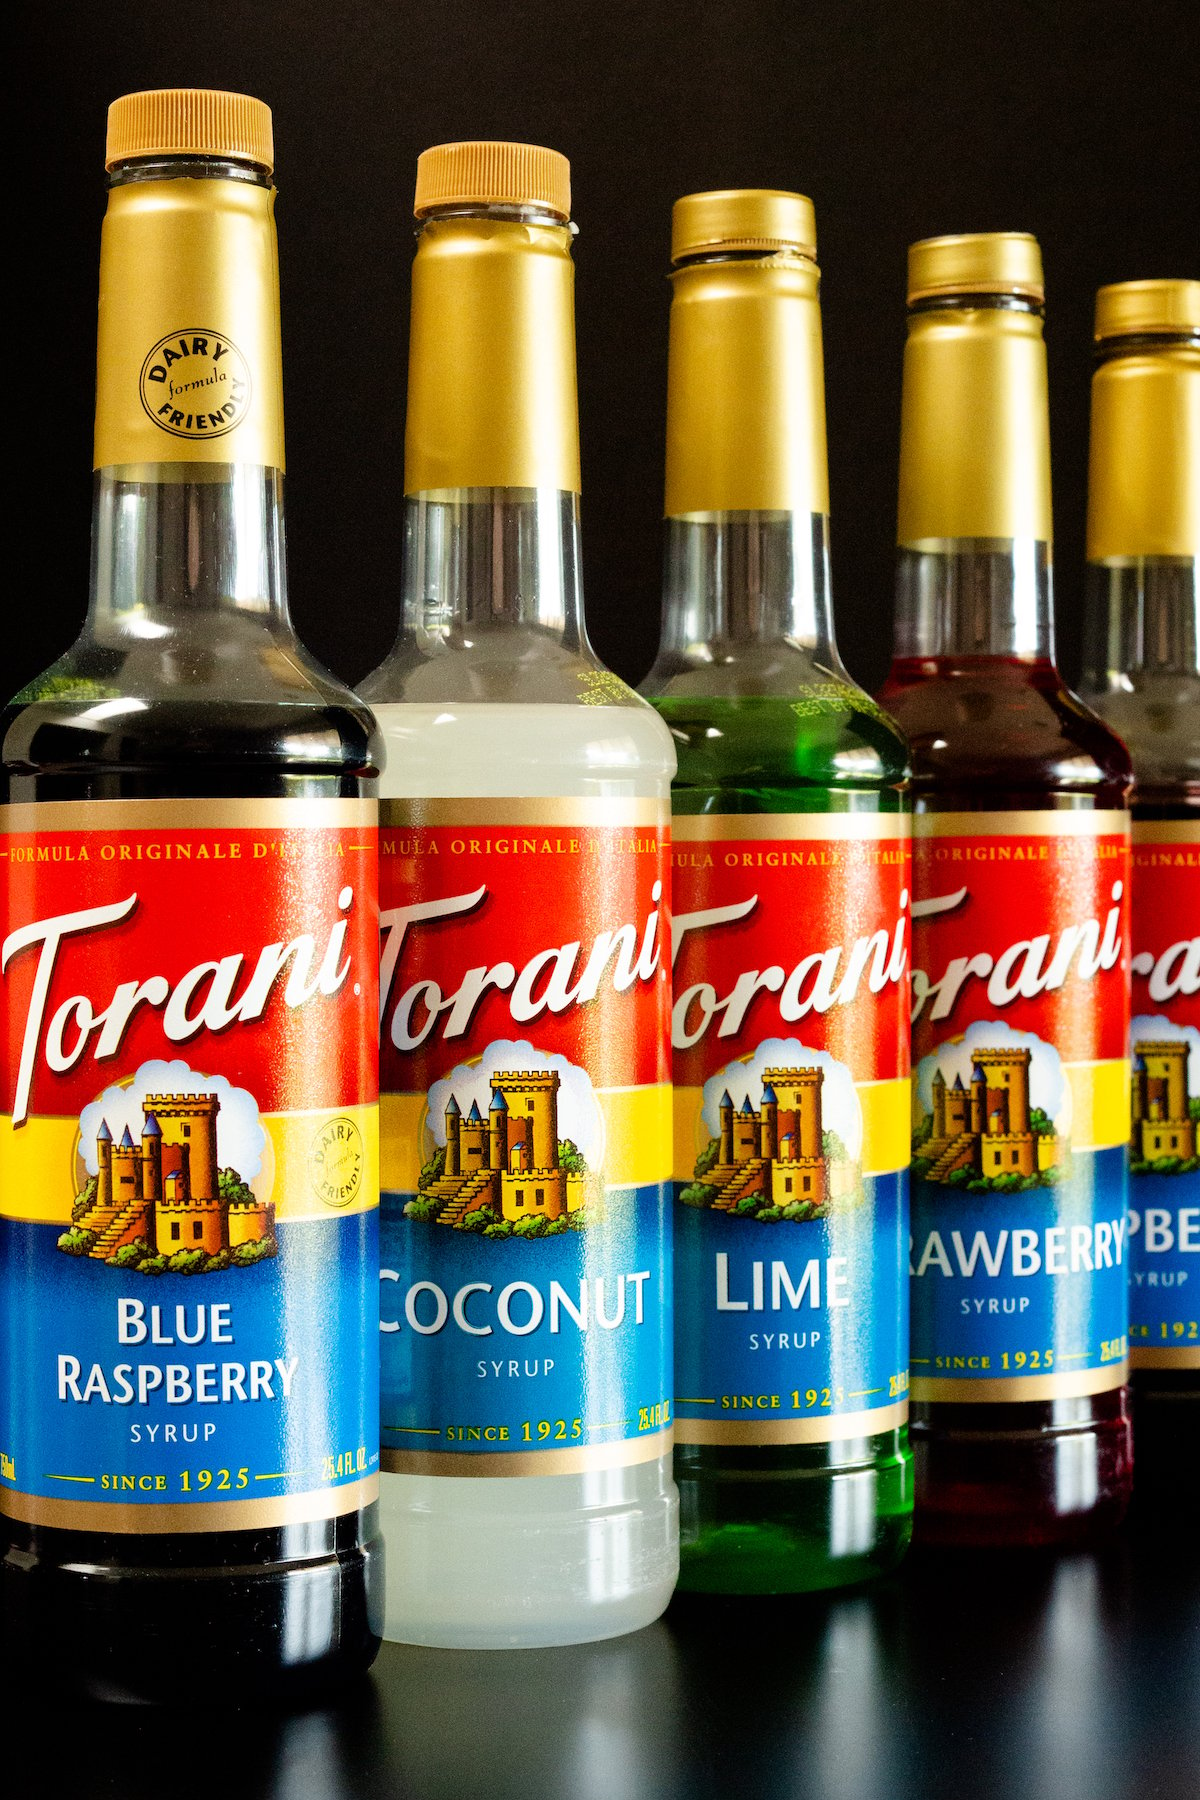 Five different bottles of flavored Torani syrup on a black background.